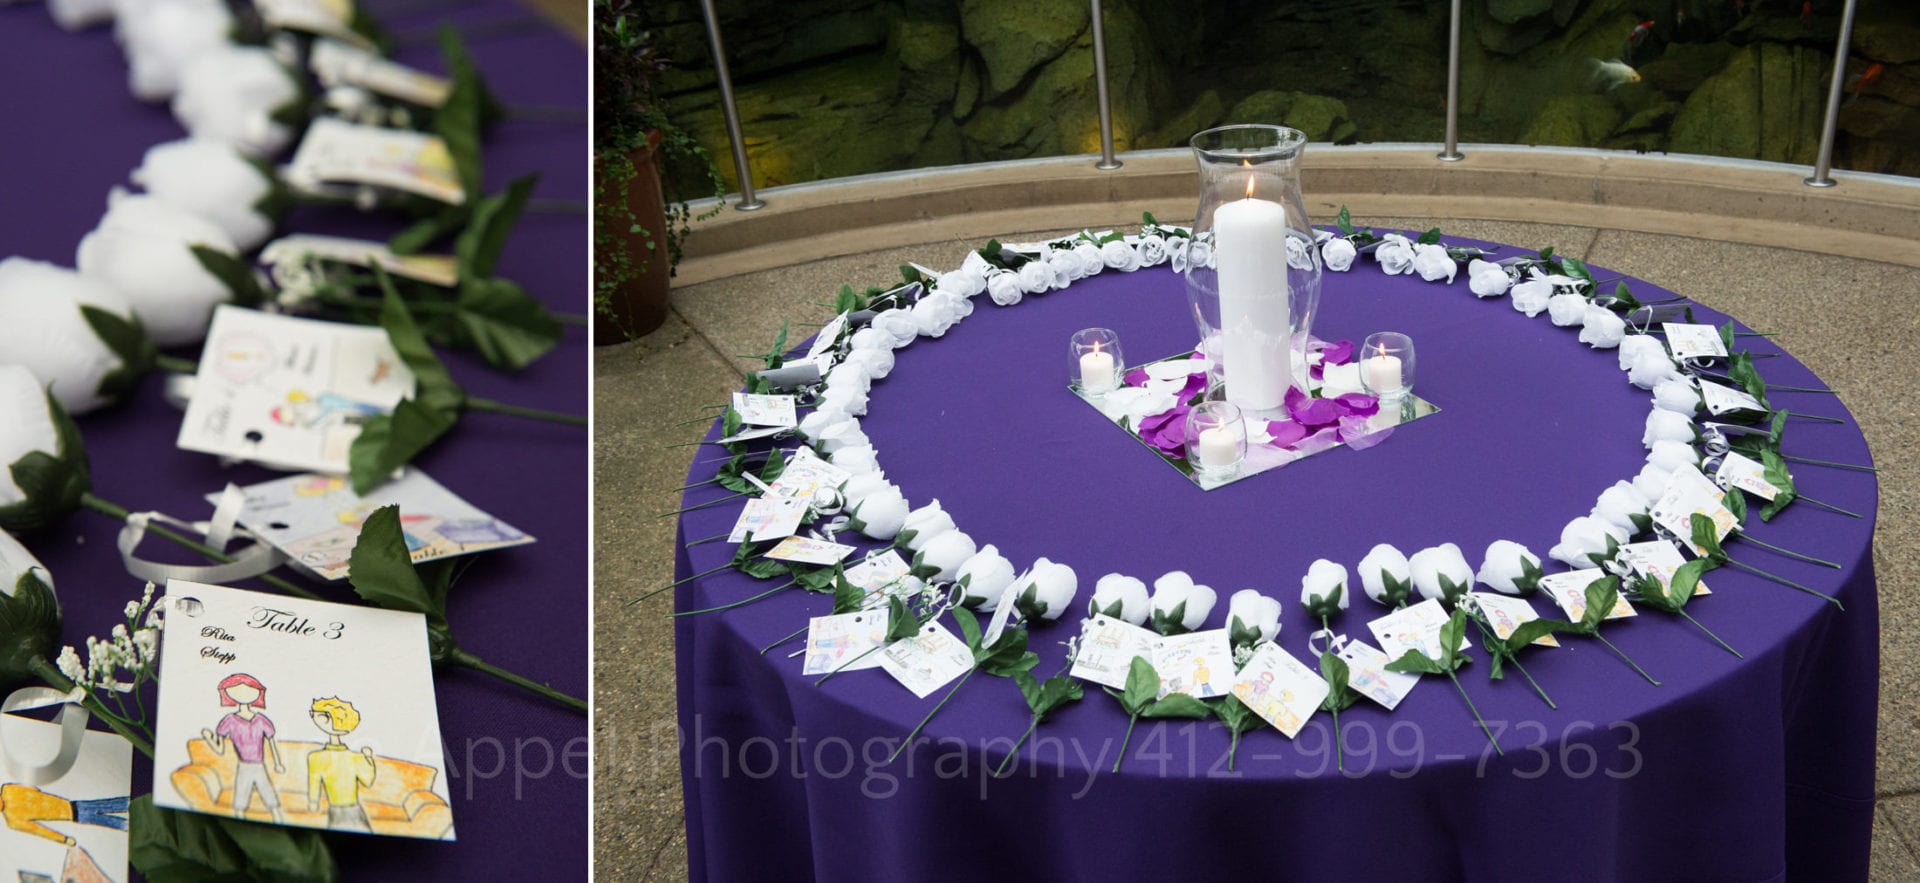 place cards attached to white roses sit on a purple table decorated with candles Phipps Conservatory Weddings